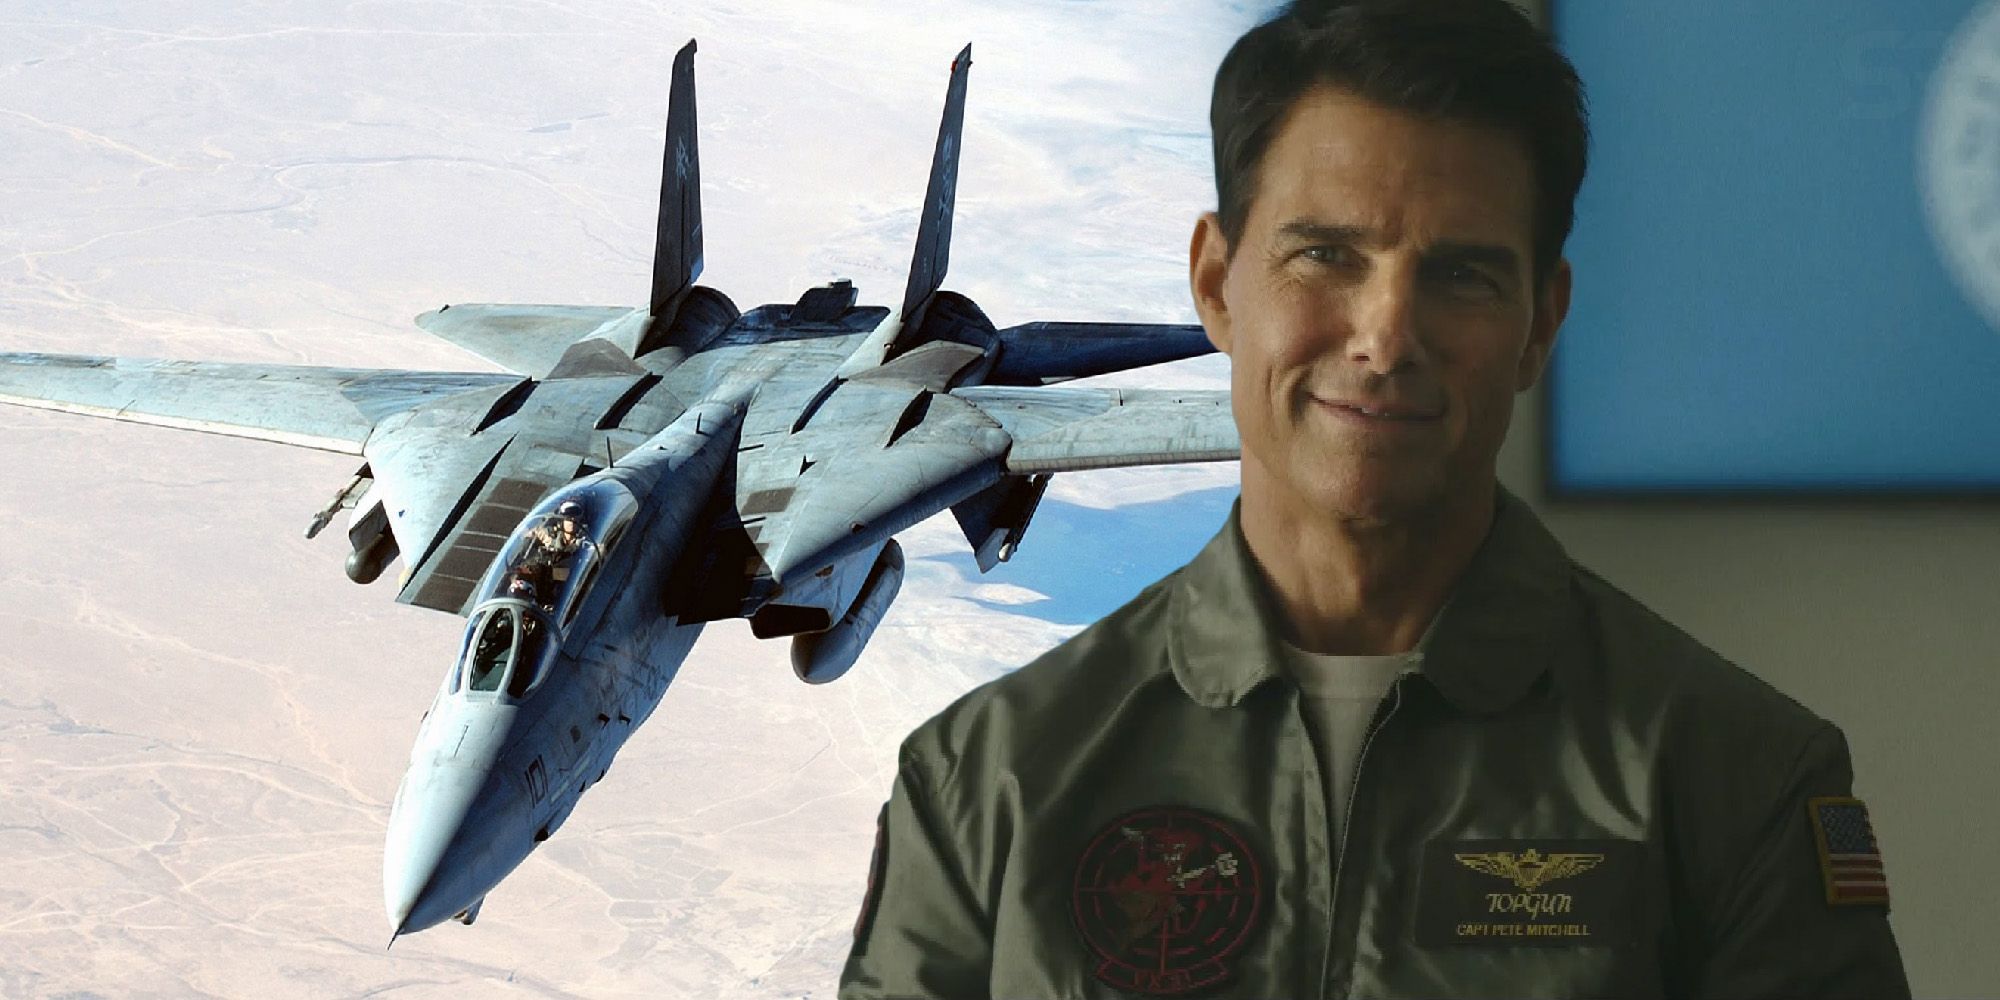 Top Gun 2: All 6 Jet Fighter Planes That Appear In Maverick